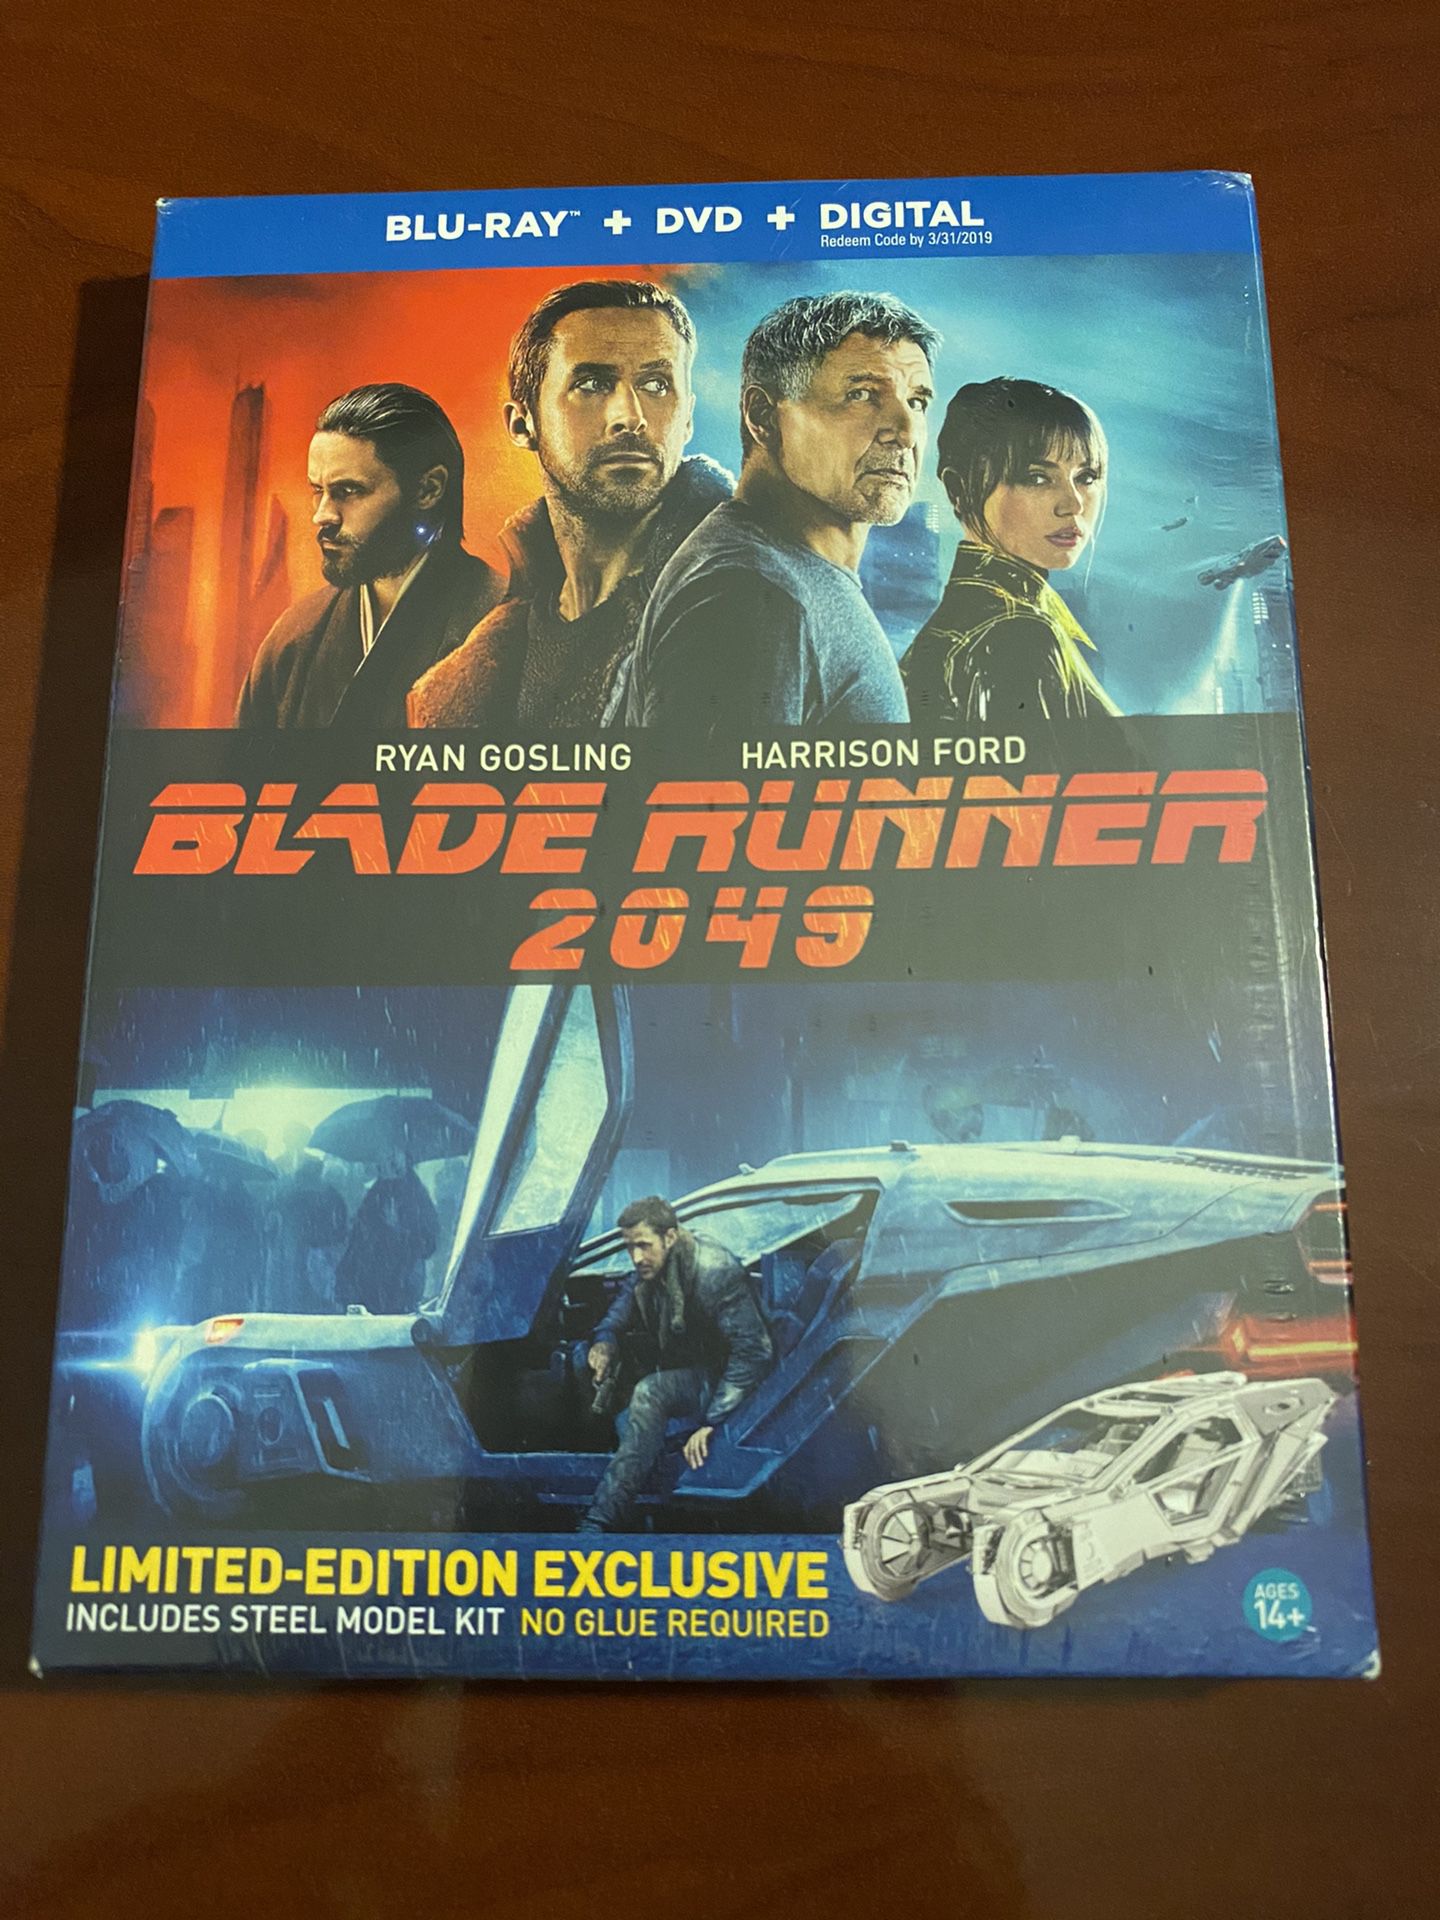 Blade Runner 2049 Limited Edition Includes Steel Model Kit